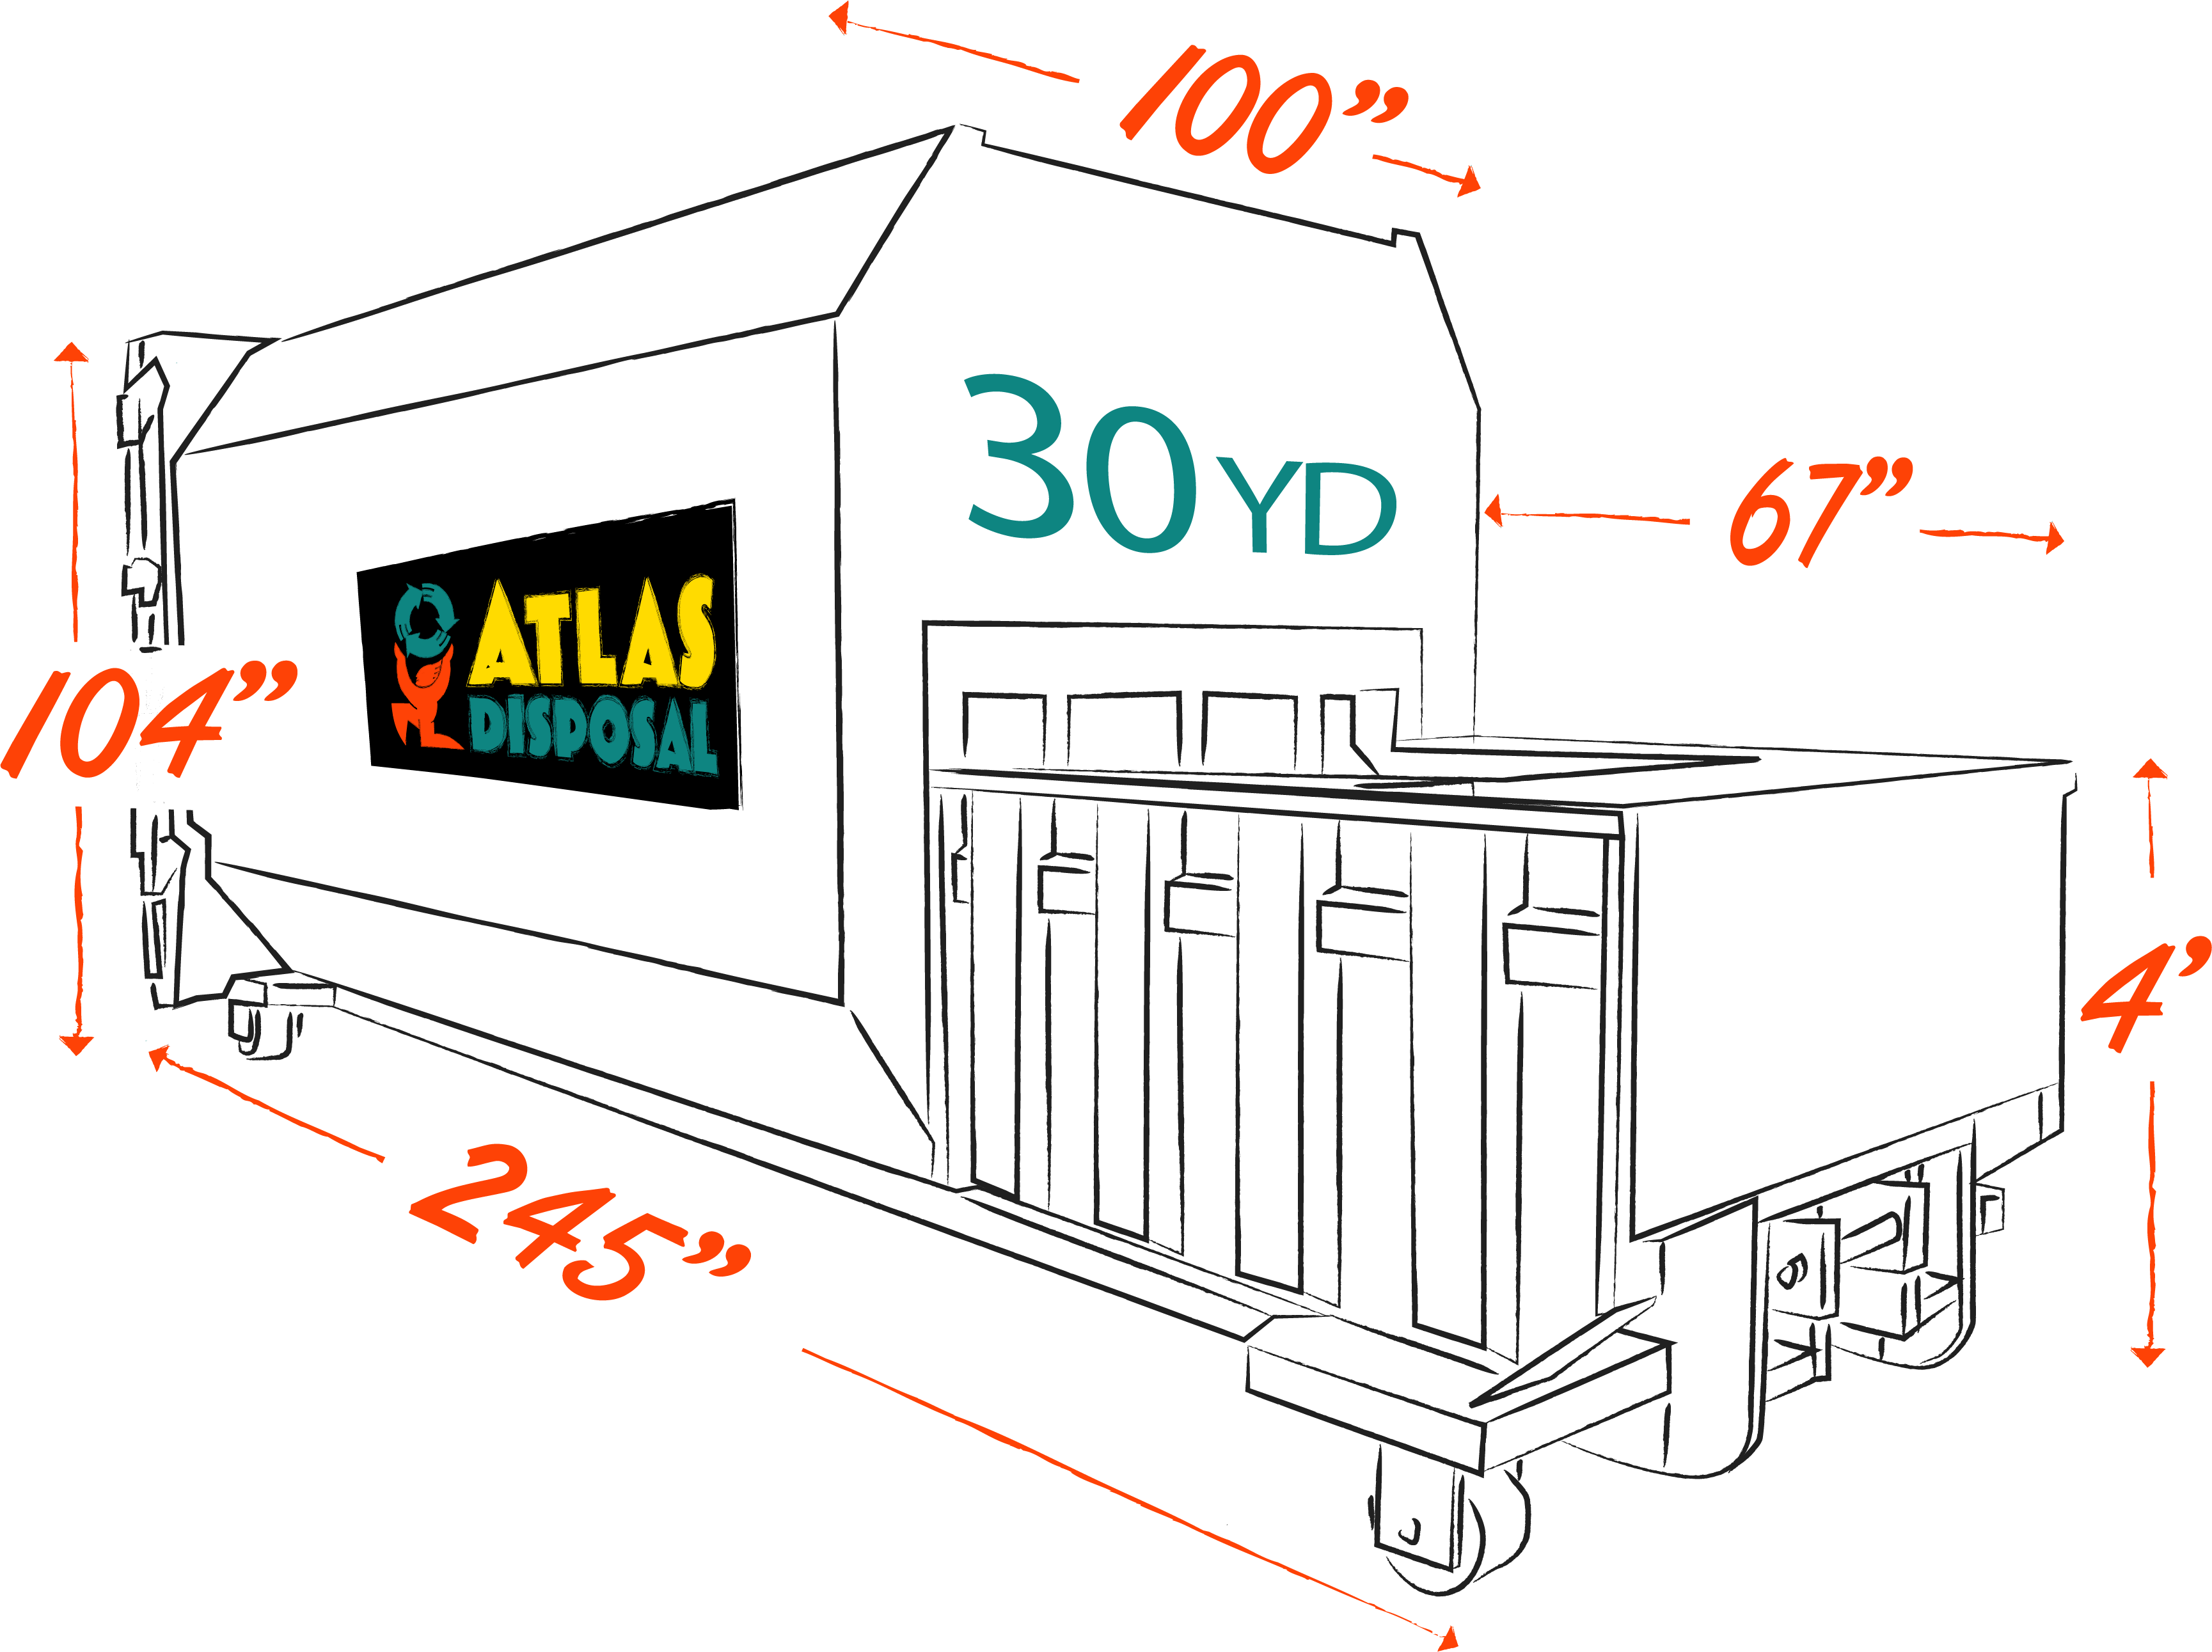 //atlasdisposal.com/wp-content/uploads/2022/04/AtlasContainer-Sketches30yrd-compactoroutlined-11.png